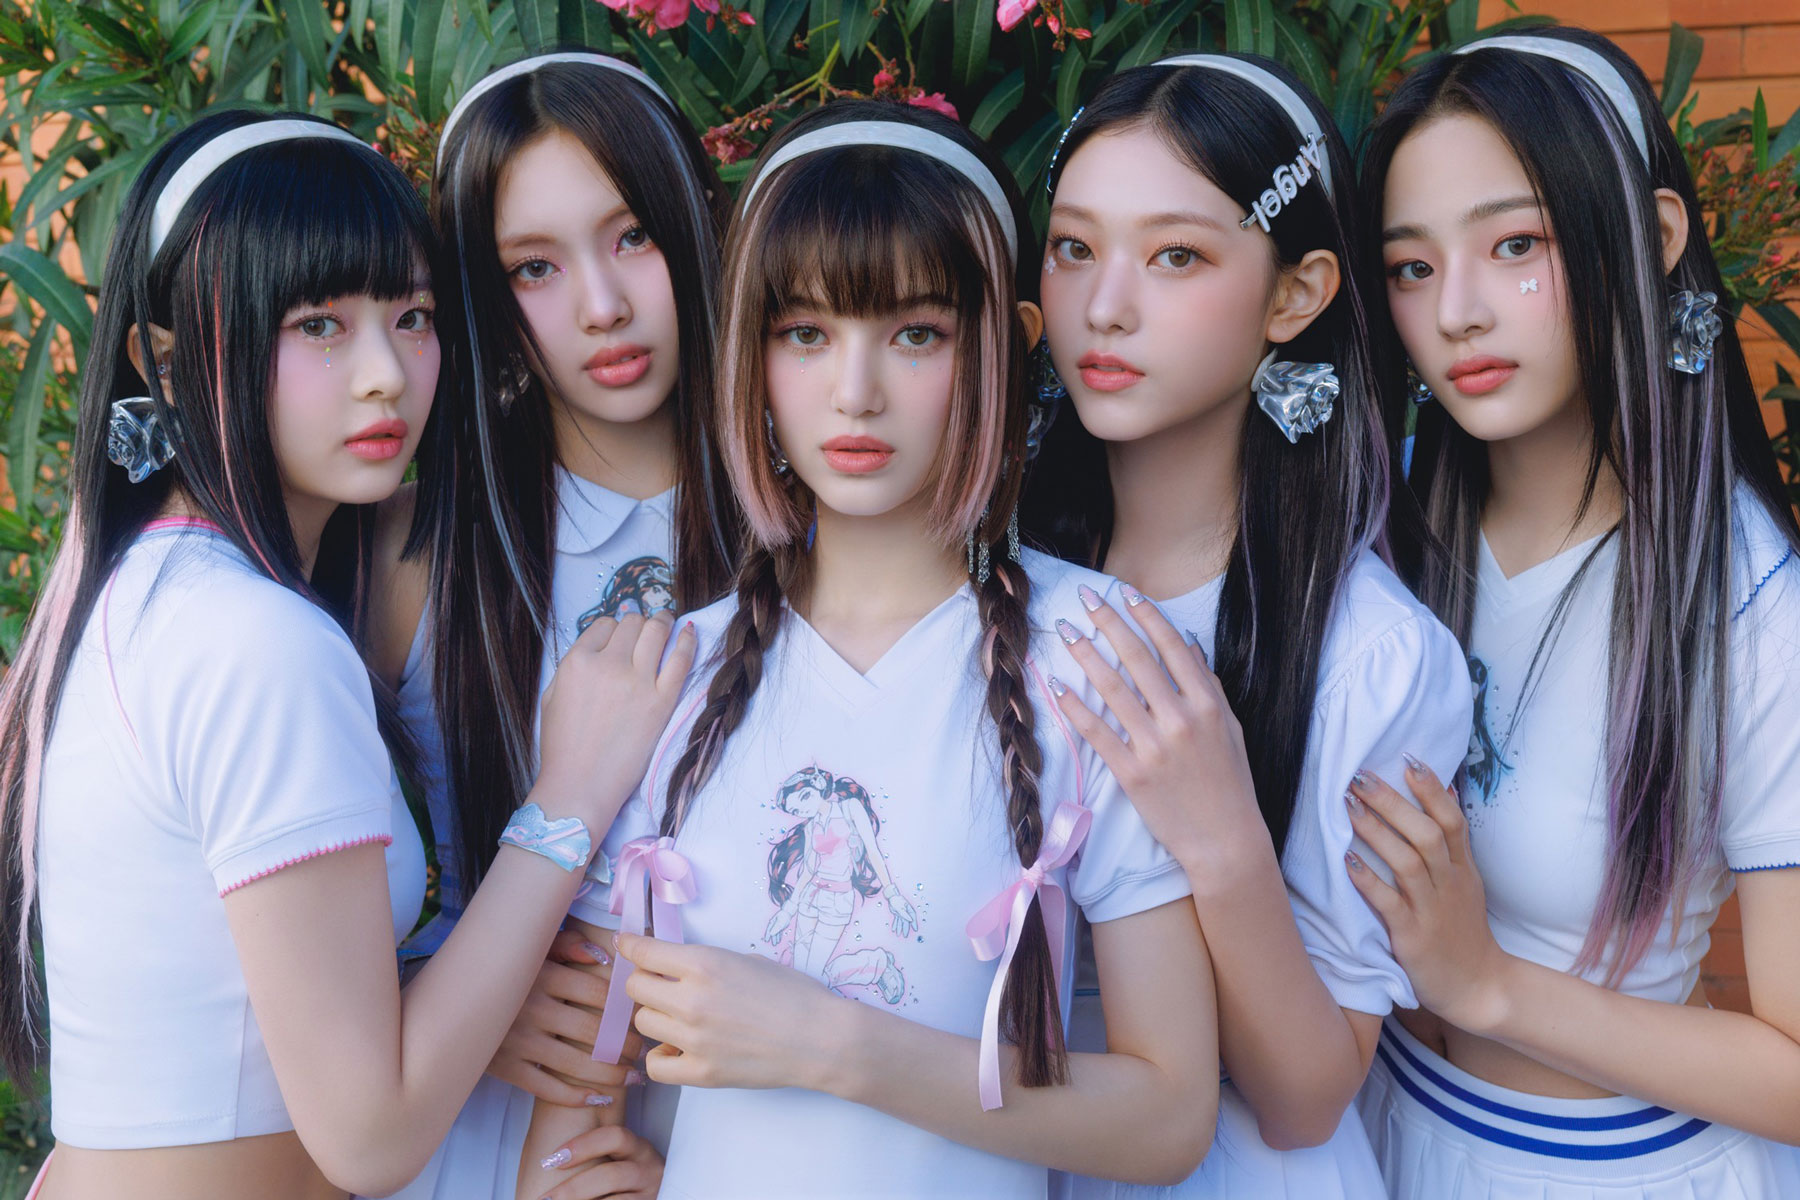 NewJeans’ comeback to proceed amid HYBE, ADOR clash — report | NewJeans members (from left) Hanni, Hyein, Danielle, Haerin, Minji. Image: NewJeans' official website